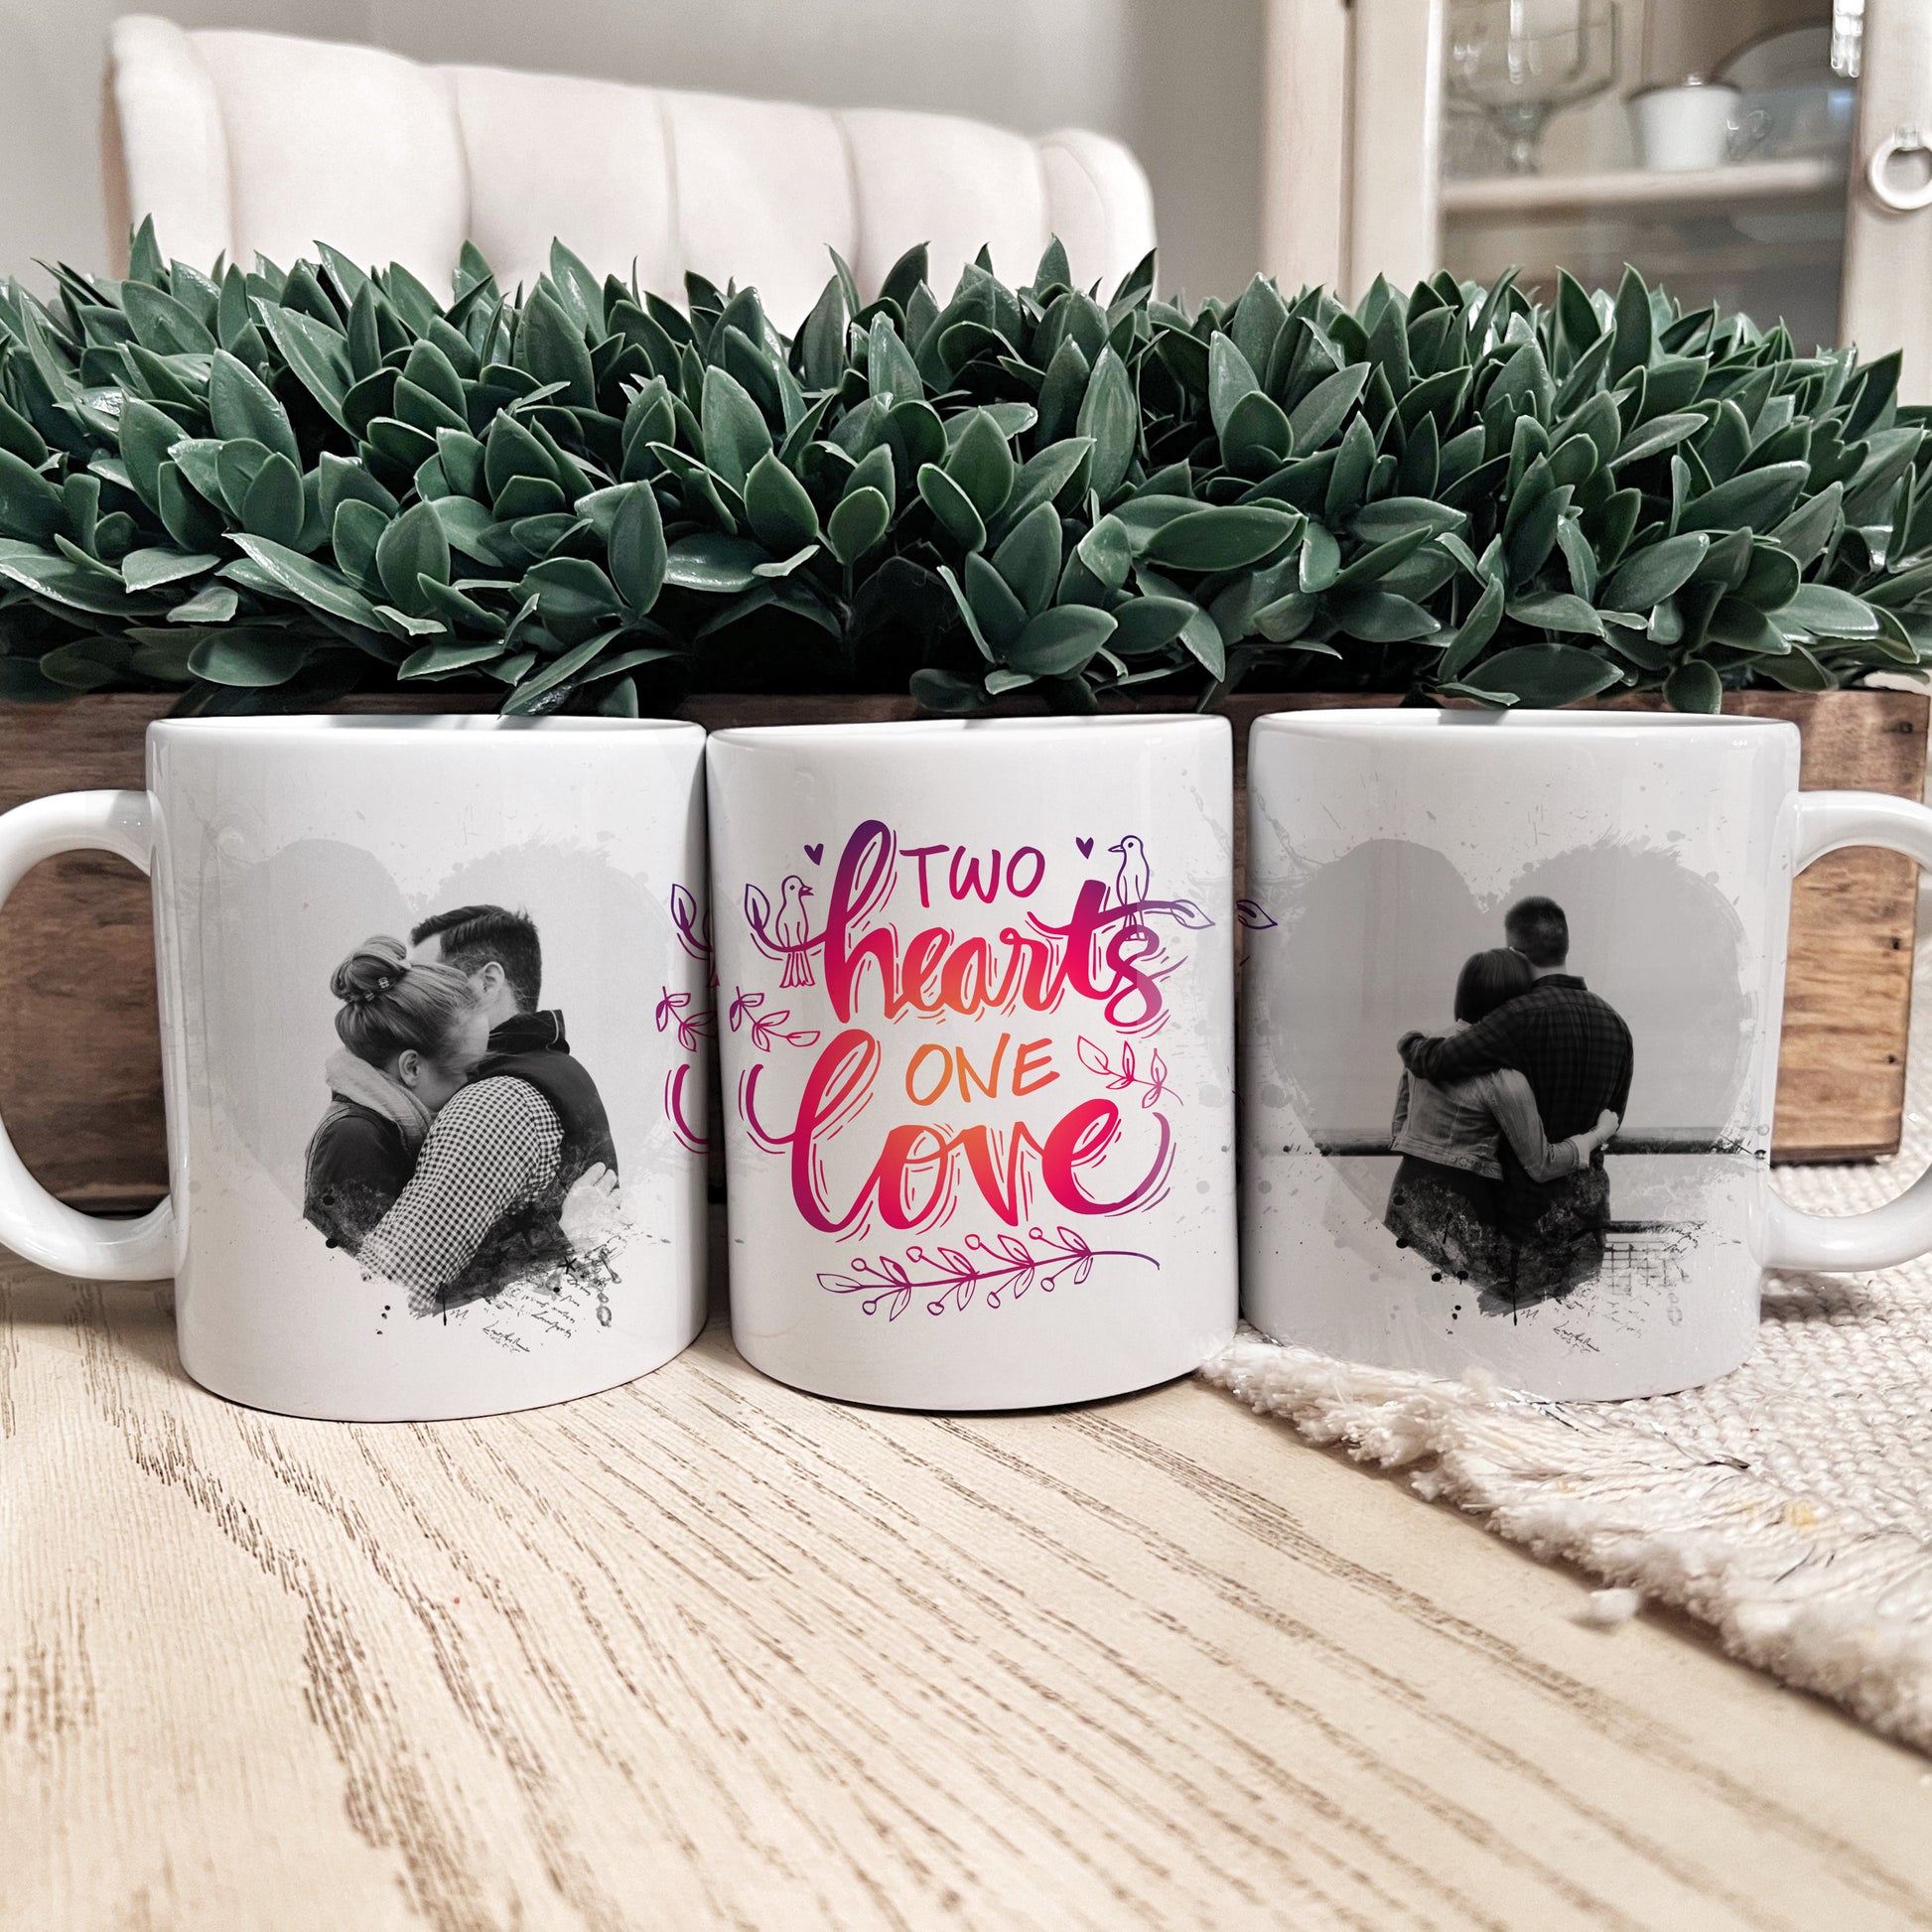 Personalized Mug with Picture - Custom Coffee Mug for Her or Him - Valentine's Day, Anniversary, or Birthday Gift Idea